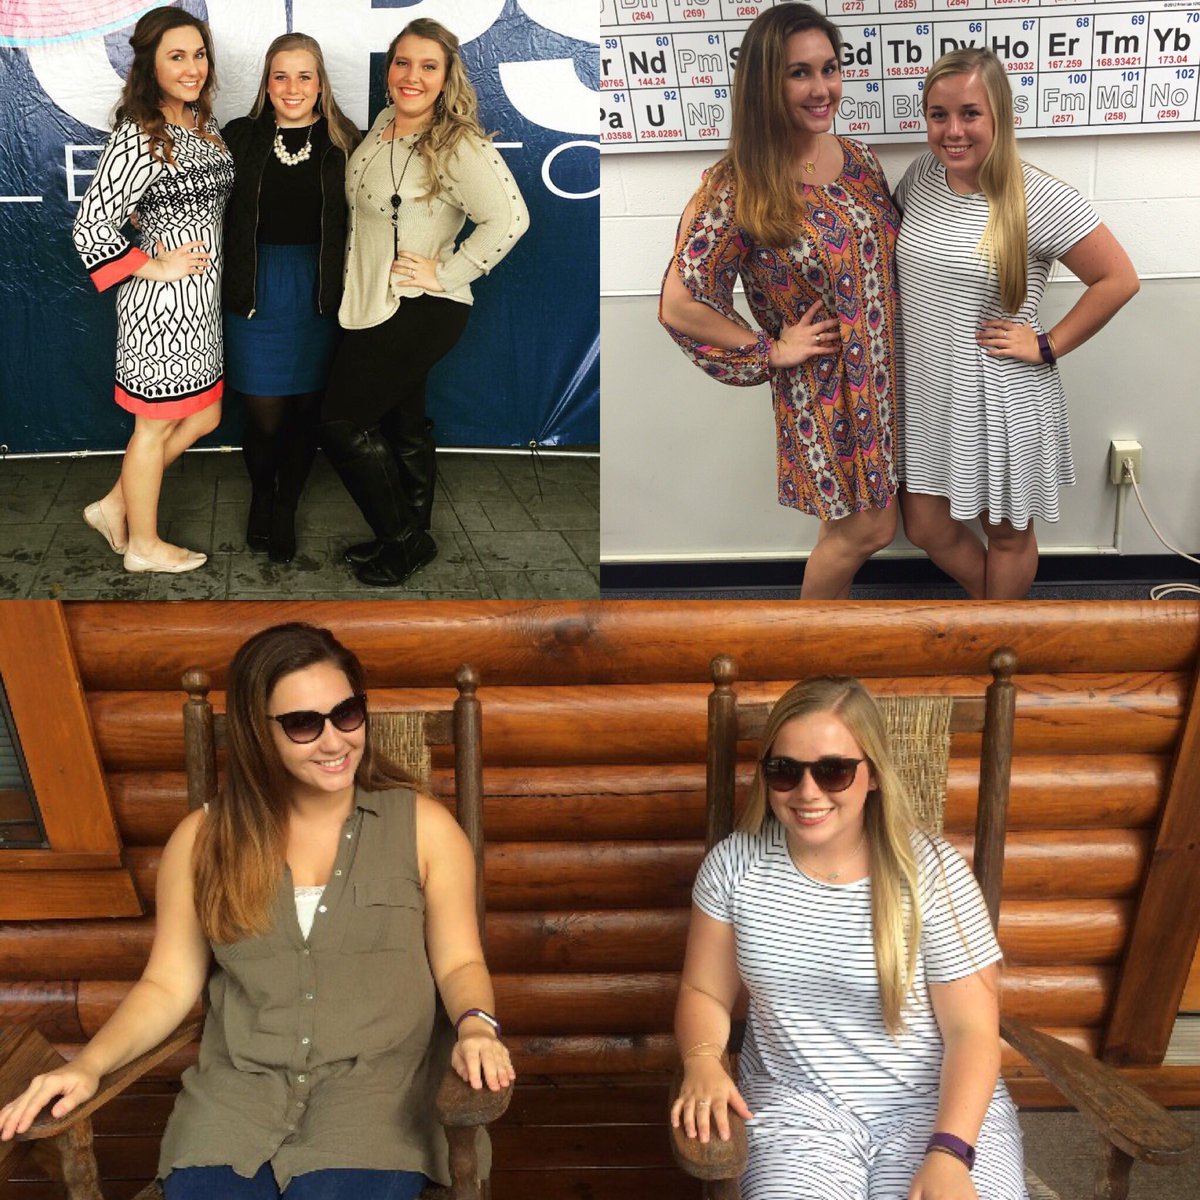 HAPPY BIRTHDAY MANDERS! Love you so much! Can't wait to go to keeneland again together. @_AmandaMcDonald